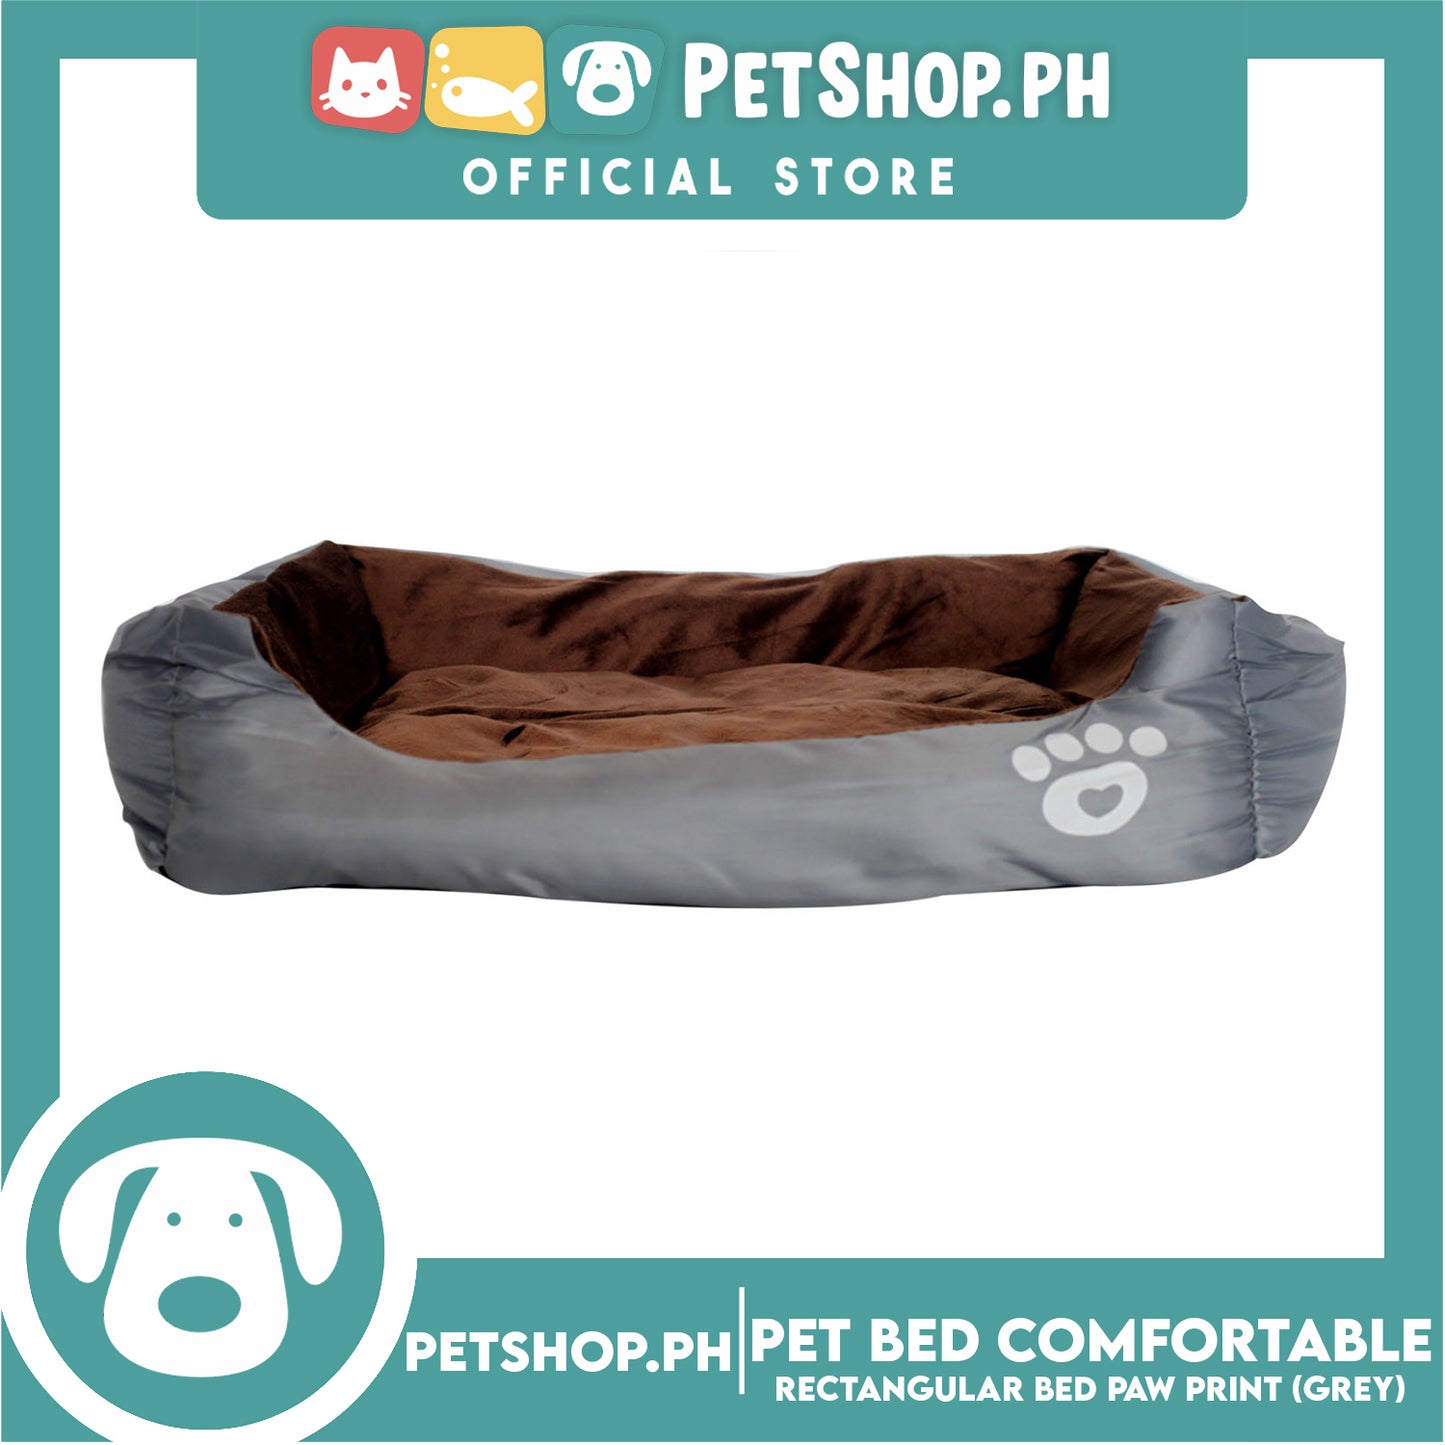 Pet Bed Comfortable Rectangular Pet Bed with Paw Print 72x58x10cm Large for Dogs & Cats (Gray)